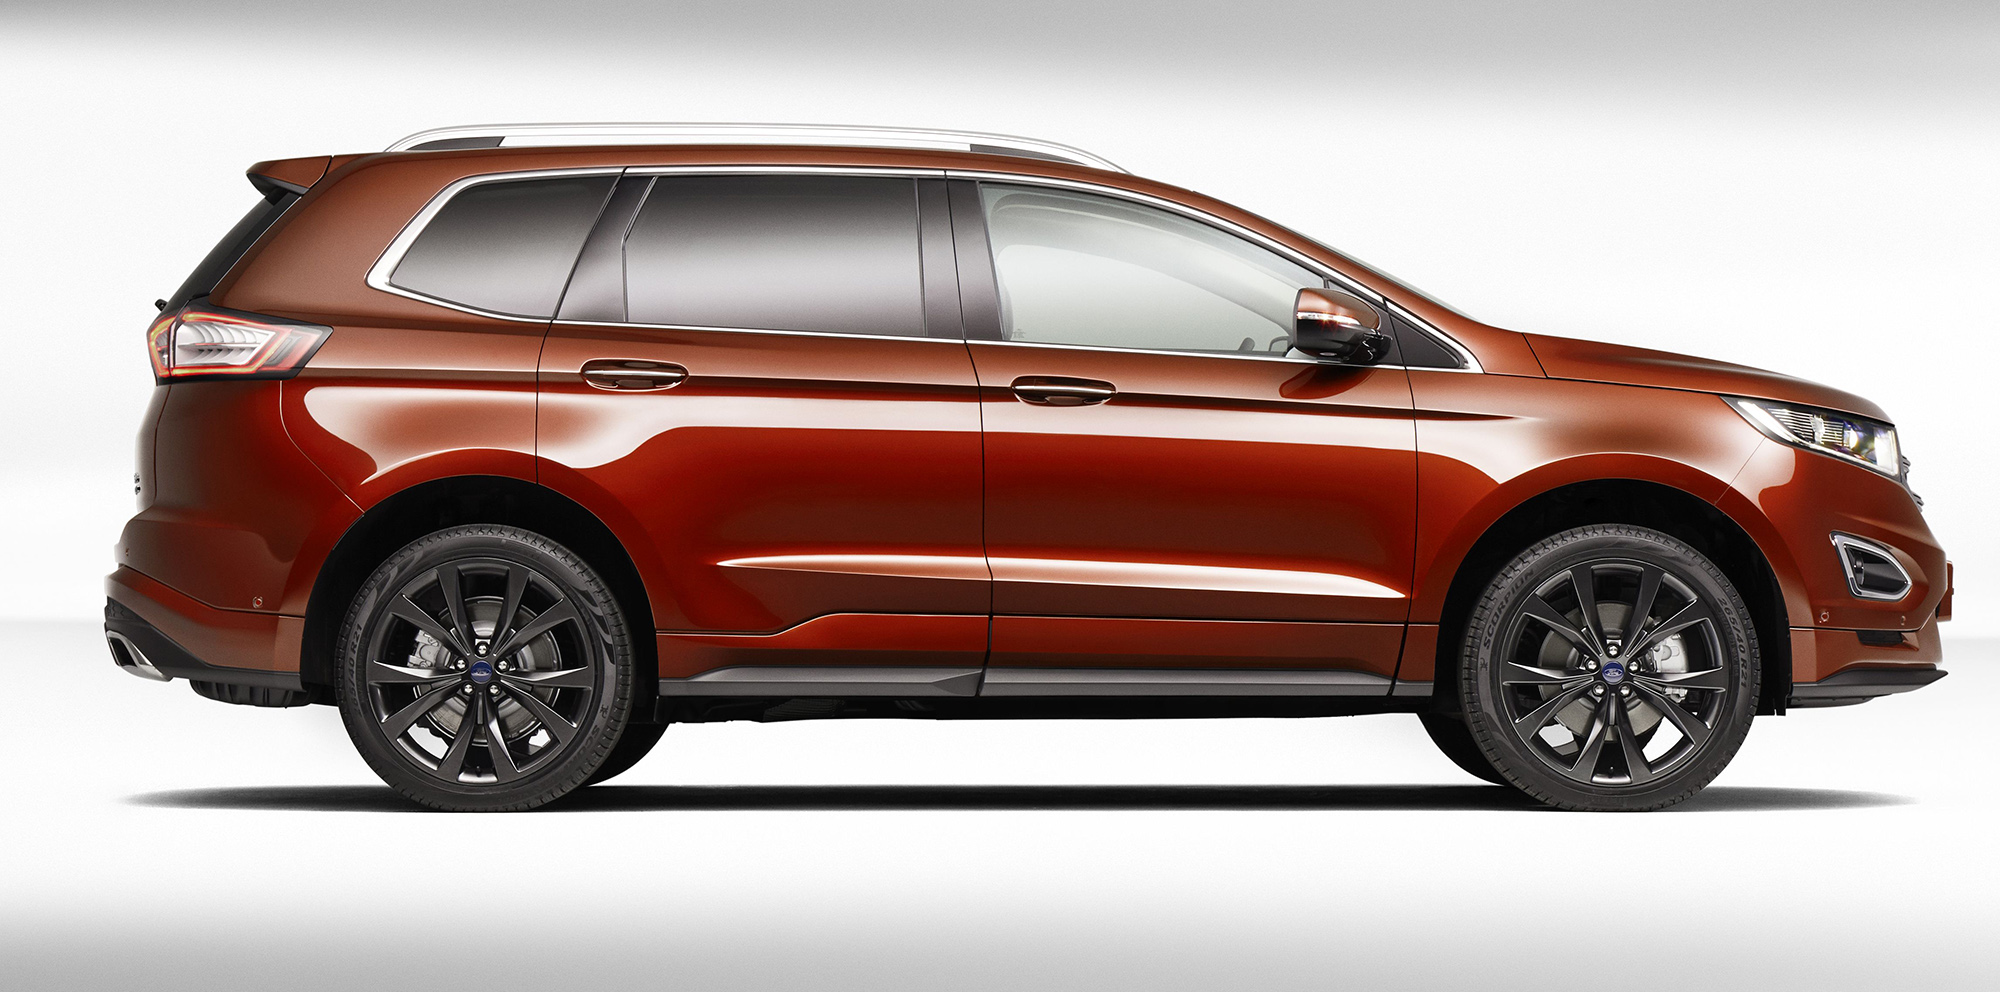 Seven-seat Ford Edge unveiled in China - Photos (1 of 3)